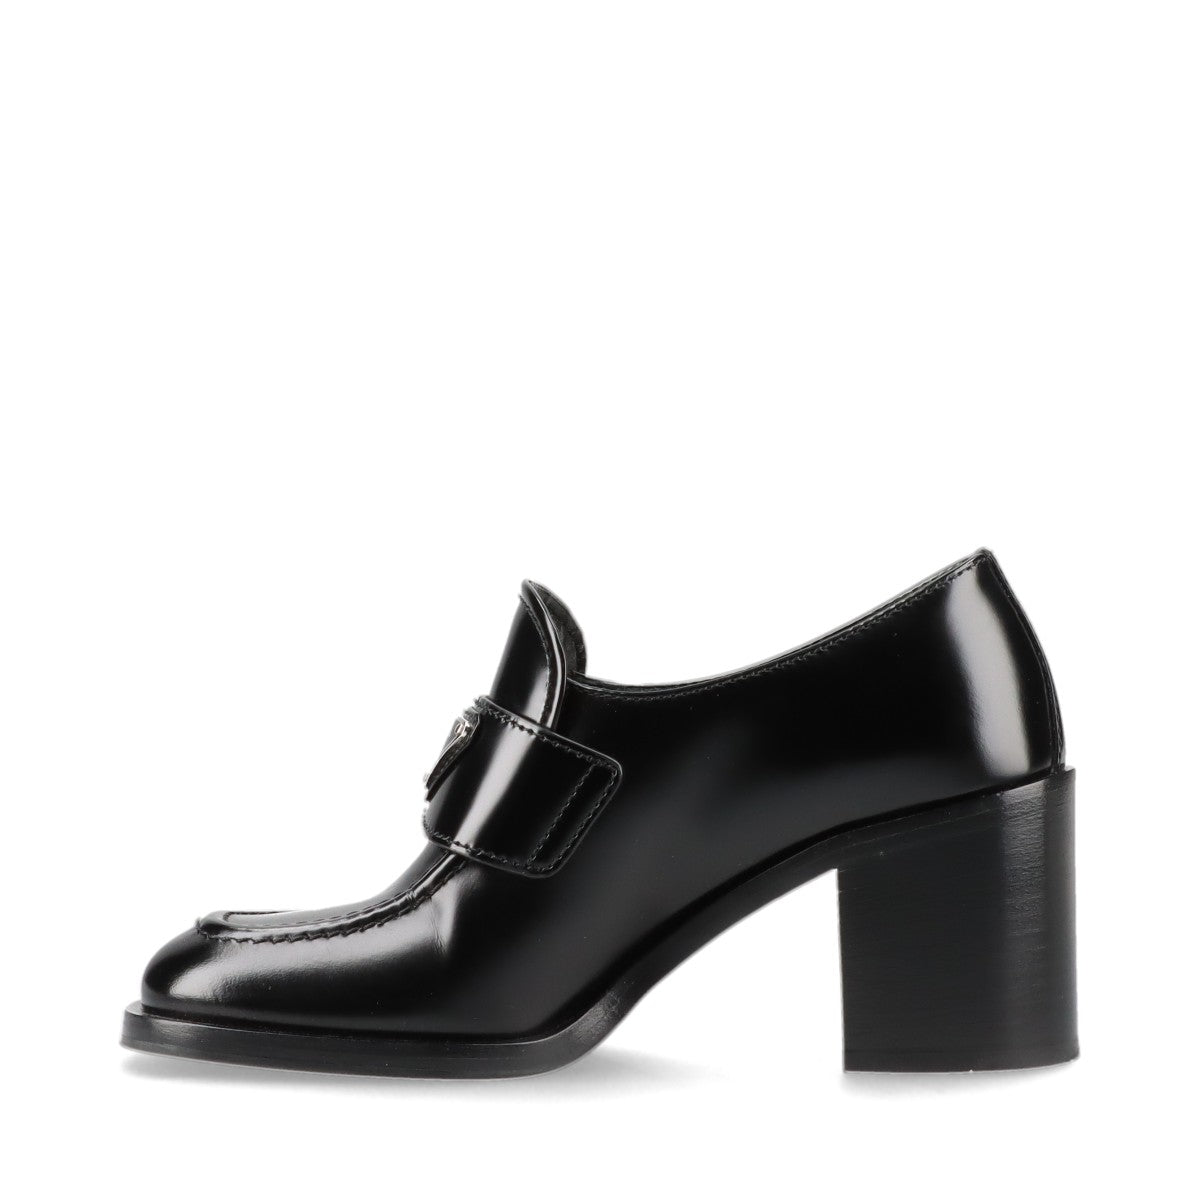 Prada Triangle logo brushed leather Loafer 36 Ladies' Black High Heel Box There is a storage bag